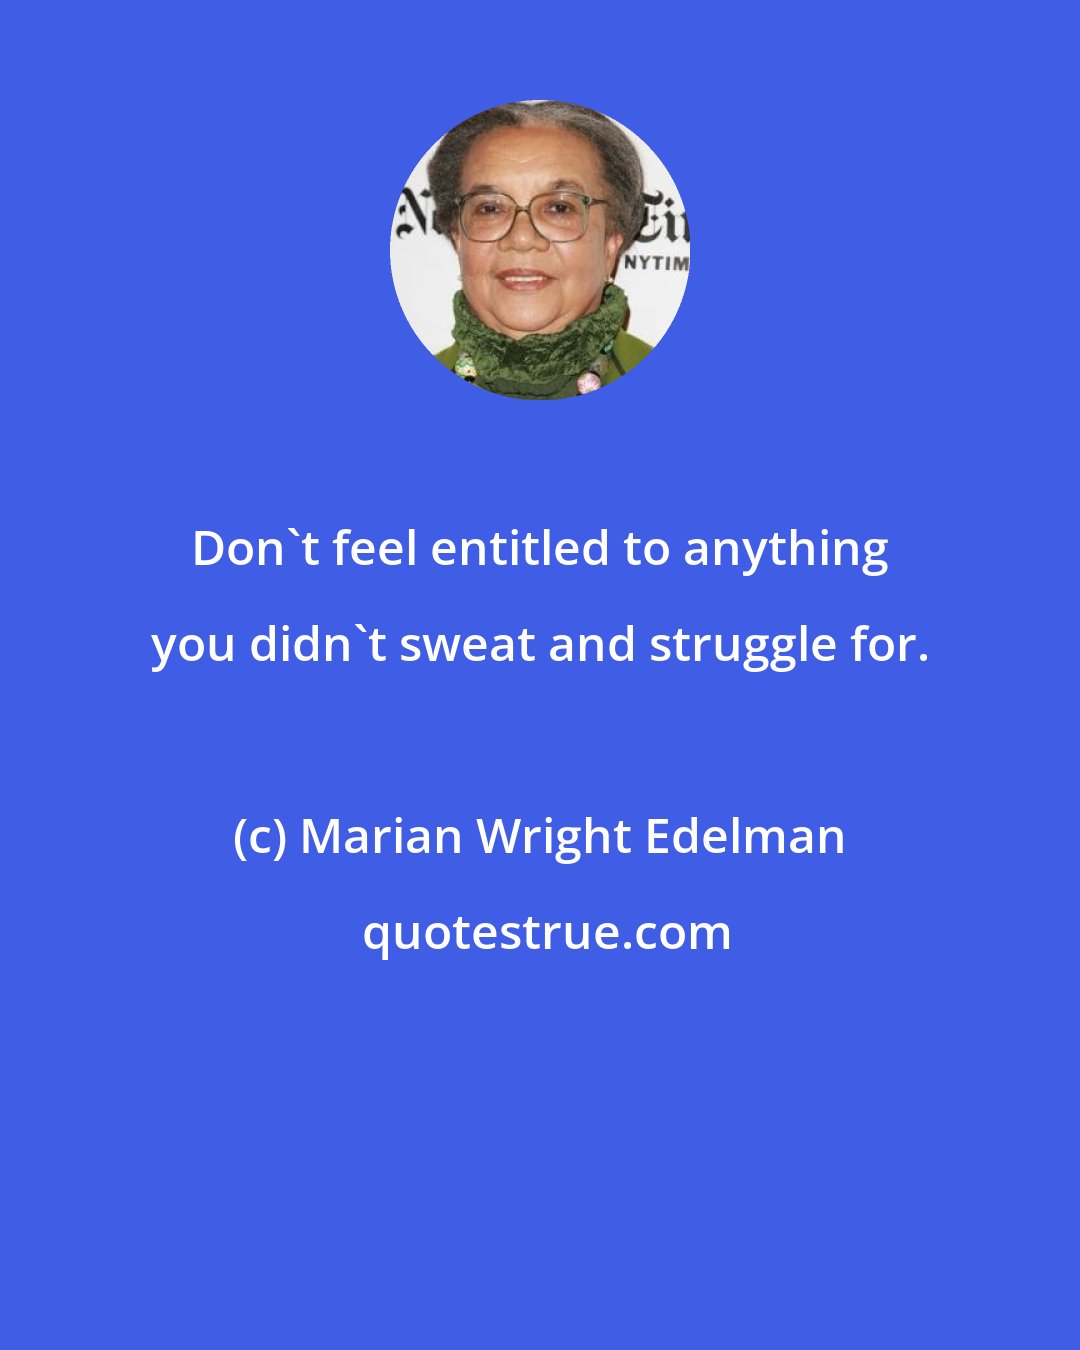 Marian Wright Edelman: Don't feel entitled to anything you didn't sweat and struggle for.